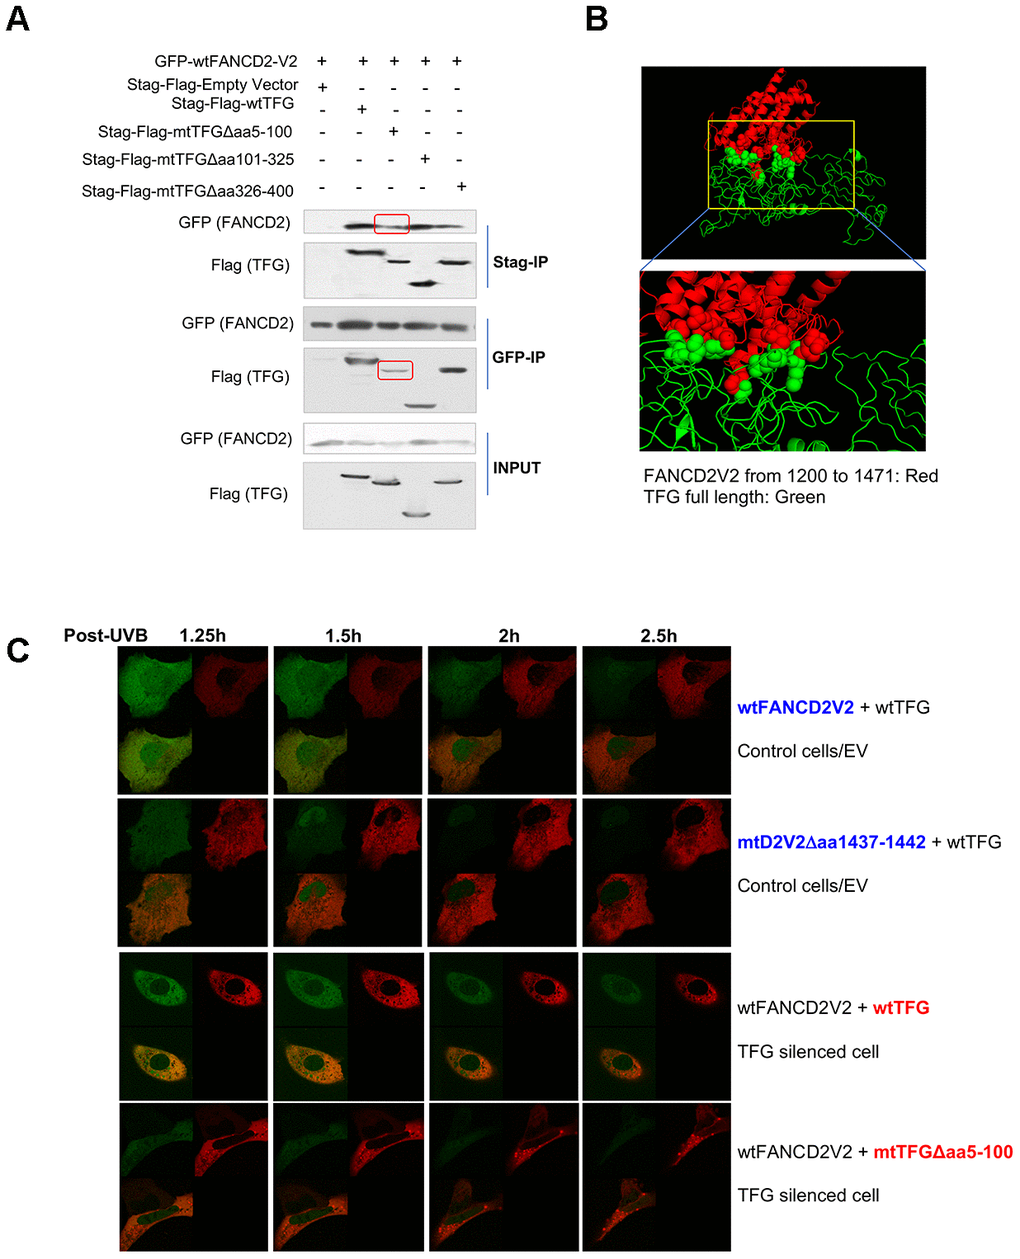 AA 5-100 of TFG contributes to the interaction between TFG and FANCD2-V2. (A) Aminol terminal of TFG confers its association with FANCD2-V2. HEK293T cells were transfected with Stag-Flag-wtTFG, Stag-Flag-mtTFGΔaa5-100, Stag-Flag-mtTFGΔaa101-325, Stag-Flag-mtTFGΔaa326-400 or empty vector together with GFP-wtFANCD2V2. Both GFP and Stag antibodies’ IPs were performed and the pulldowns were detected by GFP and Flag antibodies. Red line-squares indicate the reduced interaction between GFP-wtFANCD2 and Stag-Flag-mtTFGΔaa5-100. (B) Docking of C-terminal of FANCD2-V2 and N-terminal of TFG supports their interaction. The predicted structure of human TFG (green) was adapted well to that of partial FANCD2-V1 protein from 1200-1441 (red). (C) Both the aa1437-1442 of FANCD2-V2 and the aa5-100 of TFG are important for the earlier action of FANCD2-V2 upon DNA damage. Live imaging was performed on TFG-normally expressed U2OS cells co-transfected with GFP-wtFANCD2-V2 and RFP-wtTFG or GFP-mtFANCD2-V2(Δaa1437-1442) and RFP-wtTFG; together with TFG expression-compromised U2OS cells co-transfected with GFP-wtFANCD2-V2 and RFP-wtTFG or GFP-wtFANCD2-V2 and RFP-mtTFG(Δaa5-100) (Moving images in Supplementary Videos 2–5 respectively). Photos were taken every 30min. Green focus duration and intensity was reduced in cells carrying mtFANCD2-V2Δaa1437-1442 or mtTFGΔaa5-100 comparing to the corresponding controls.